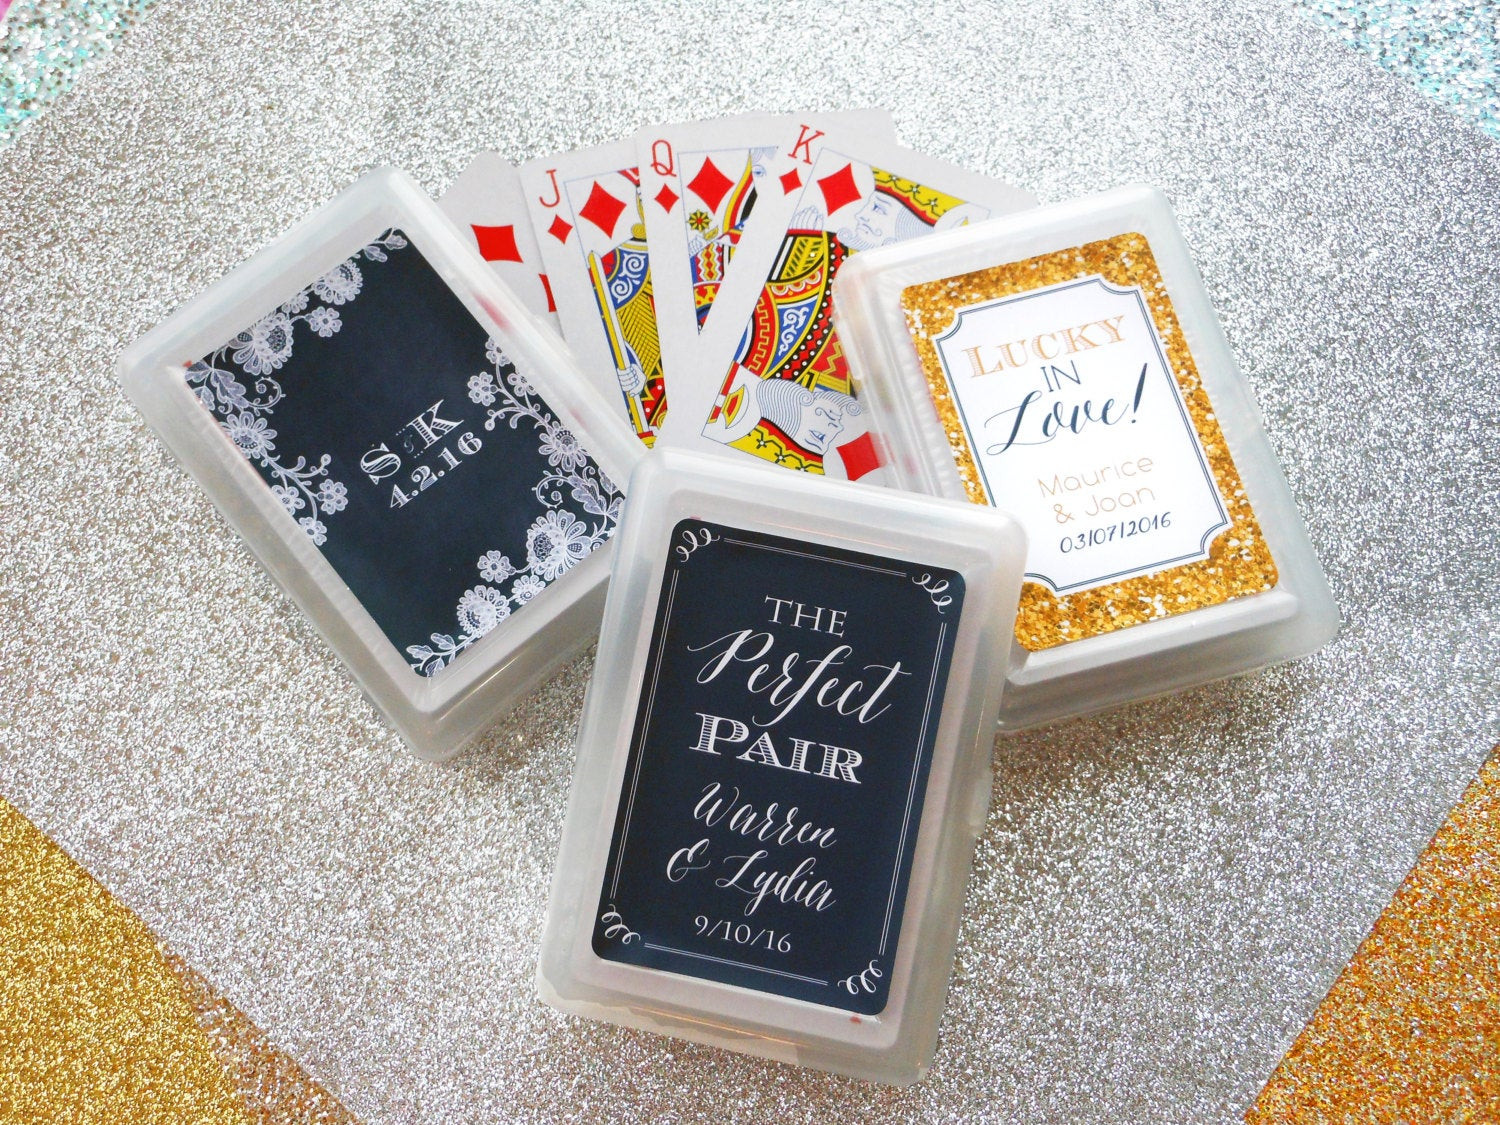 Personalized Playing Cards Wedding Favors
 SET of 10 Custom Playing Card Wedding Favor Personalized